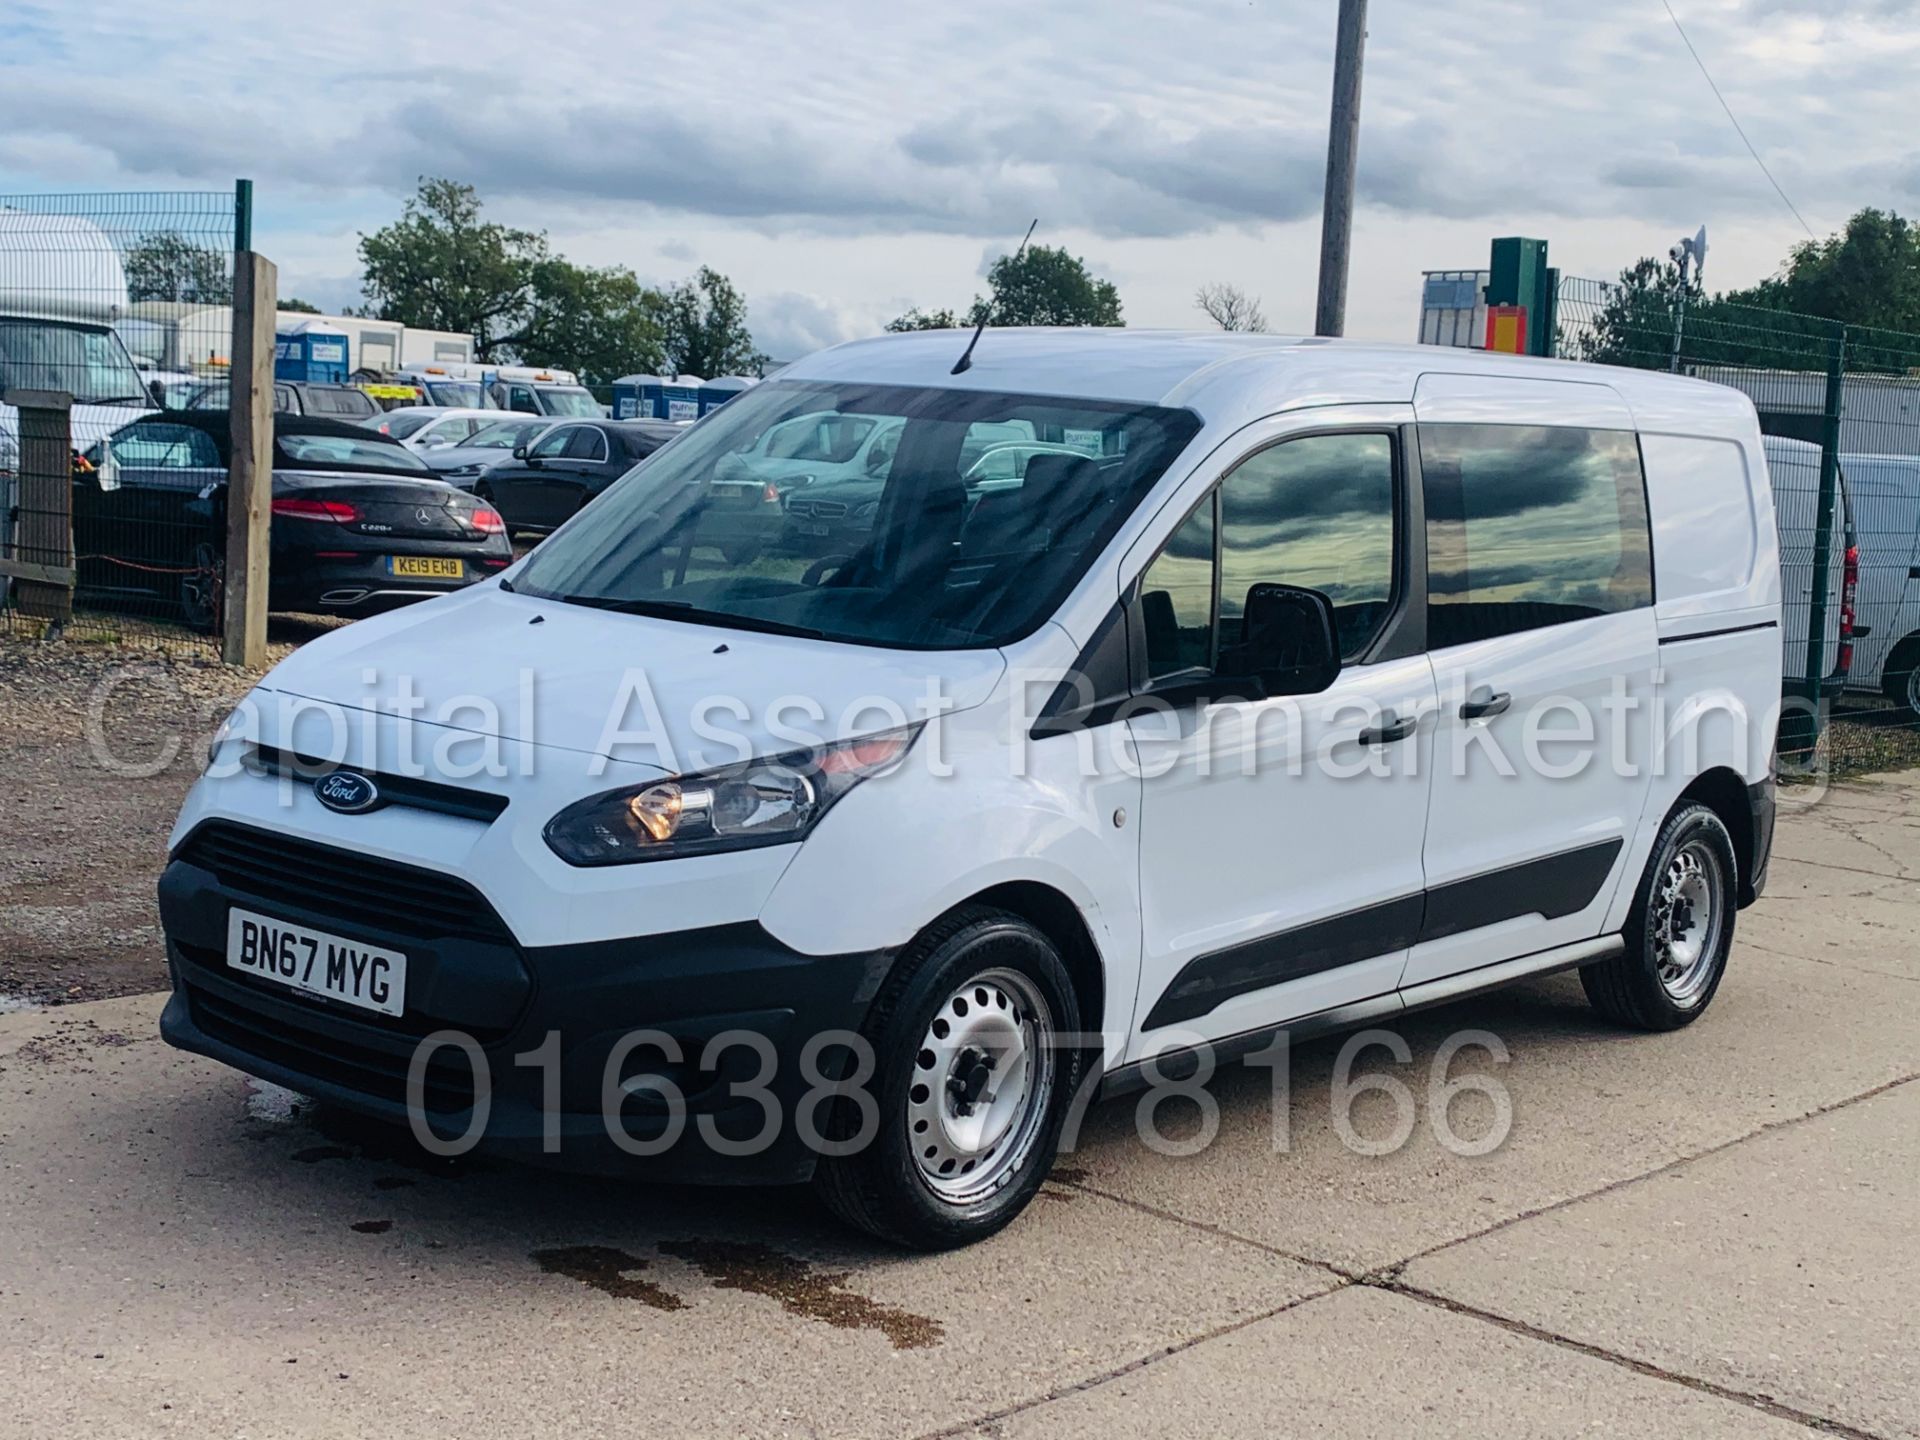 FORD TRANSIT CONNECT *LWB - 5 SEATER CREW VAN* (2018 - EURO 6) 1.5 TDCI *AIR CON* (1 OWNER) - Image 3 of 40